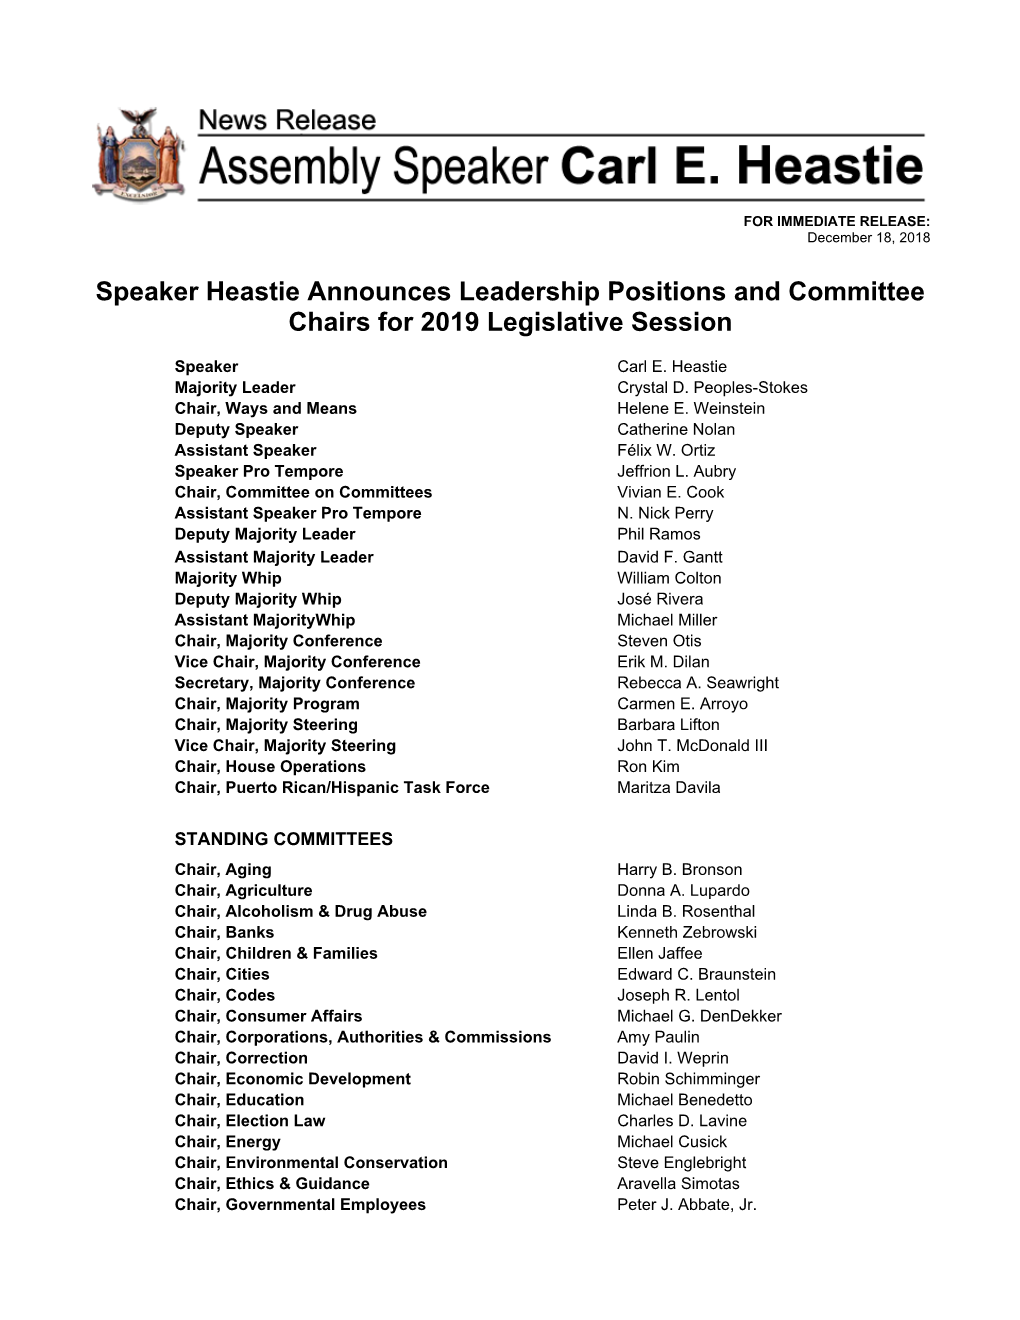 Speaker Heastie Announces Leadership Positions and Committee Chairs for 2019 Legislative Session